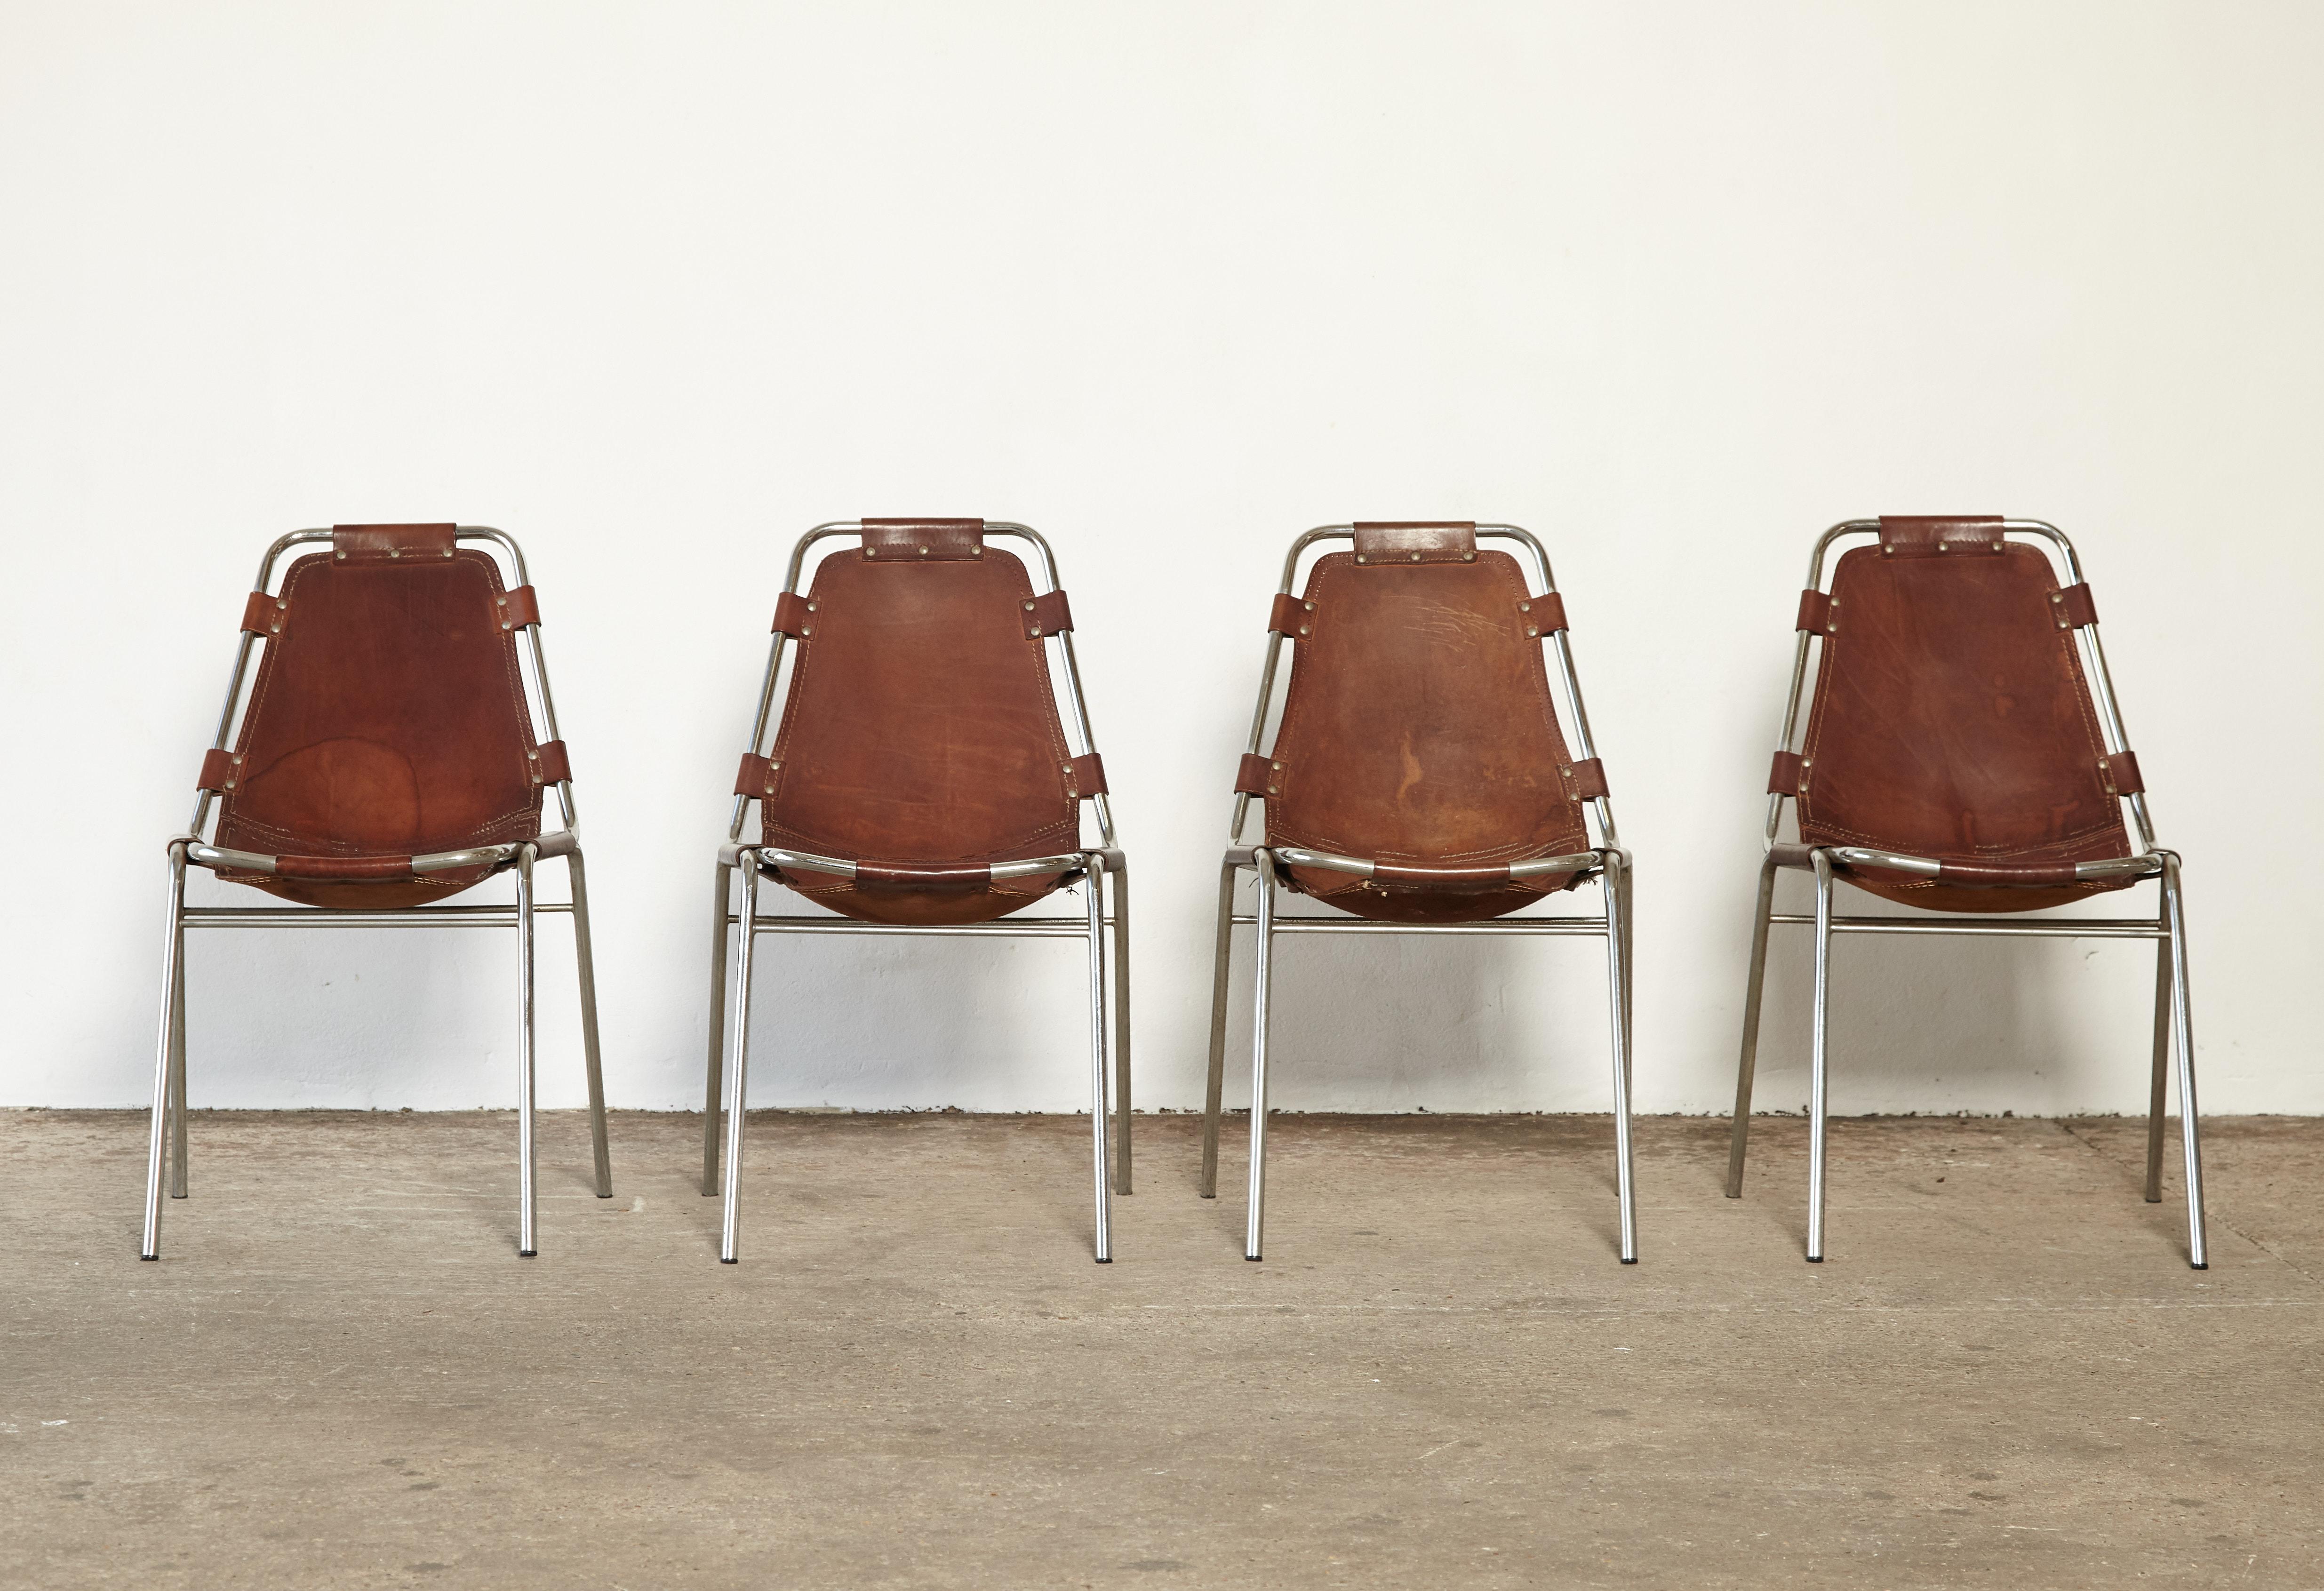 French Set of 4 'Les Arcs' Chairs Selected by Charlotte Perriand, 1970s